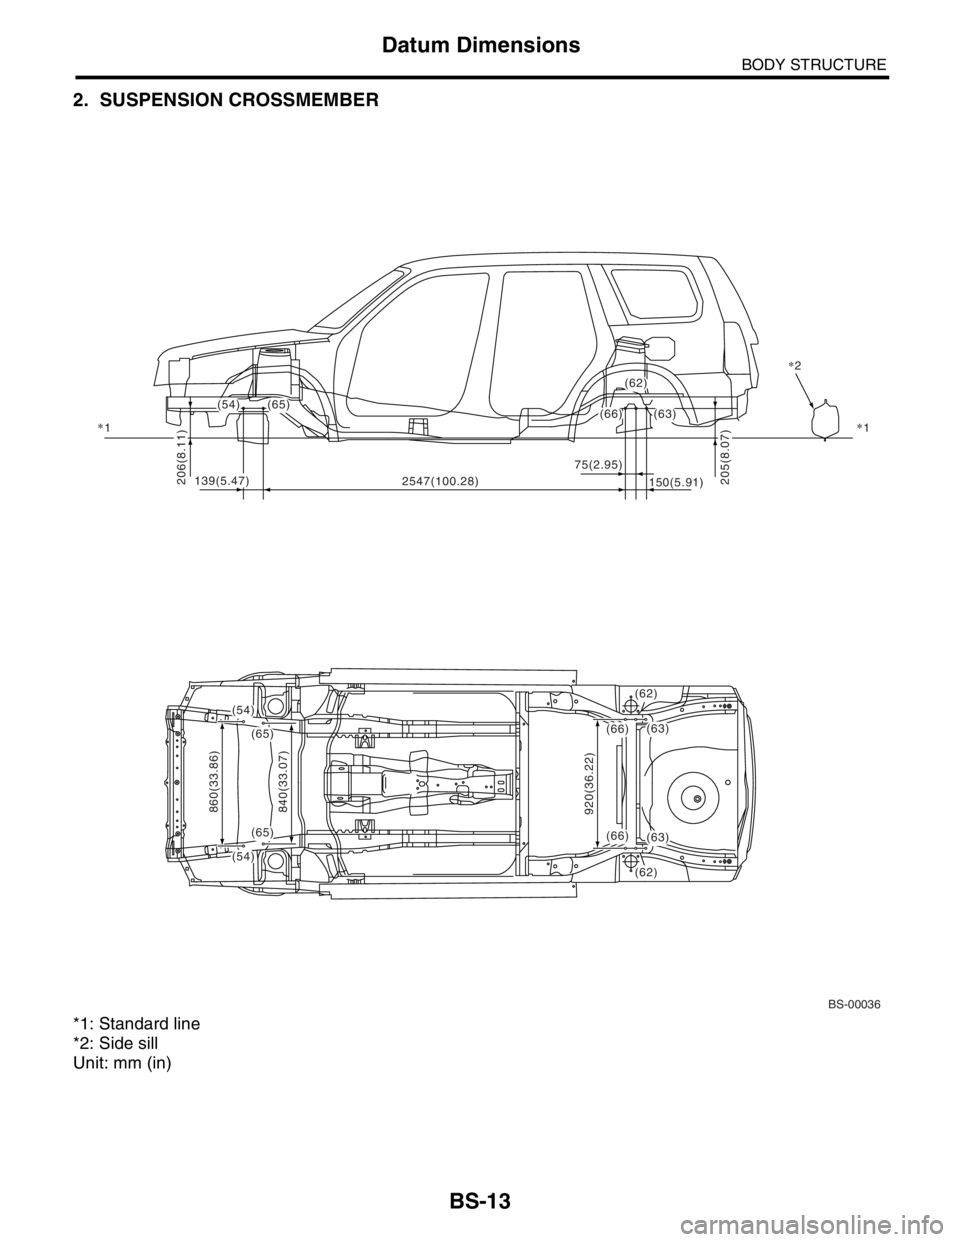 SUBARU FORESTER 2004  Service Repair Manual BS-13
BODY STRUCTURE
Datum Dimensions
2. SUSPENSION CROSSMEMBER
*1: Standard line
*2: Side sill
Unit: mm (in)
BS-00036
(54)
(54)
(65)
(65)
(54)
(66)(63)2
75(2.95)
150(5.91) 2547(100.28)
860(33.86)
840